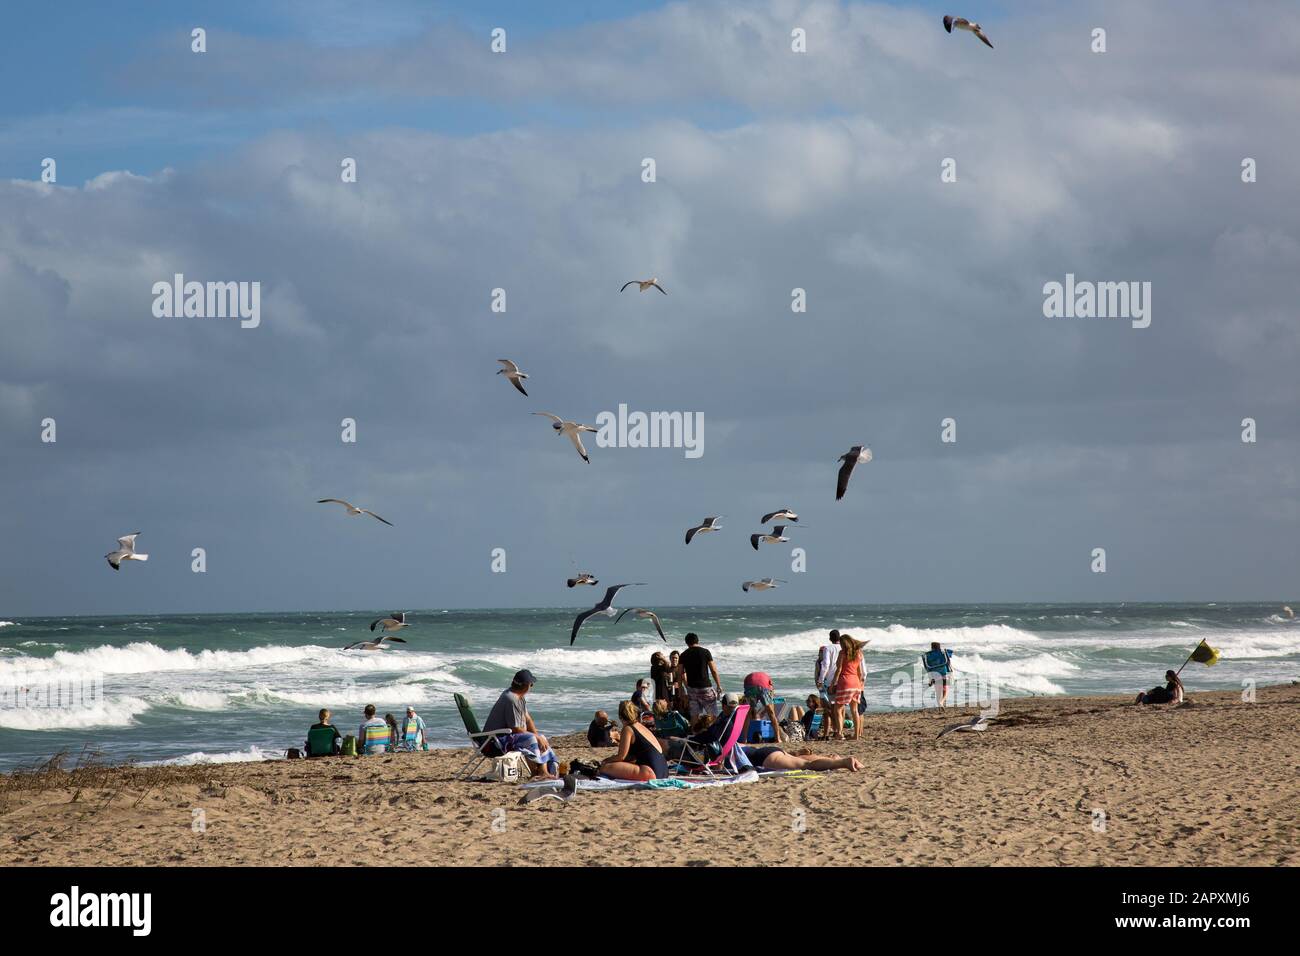 A flock of hungry seagulls swarms vacationers at Stuart Beach on Hutchinson Island, Florida, USA. Stock Photo